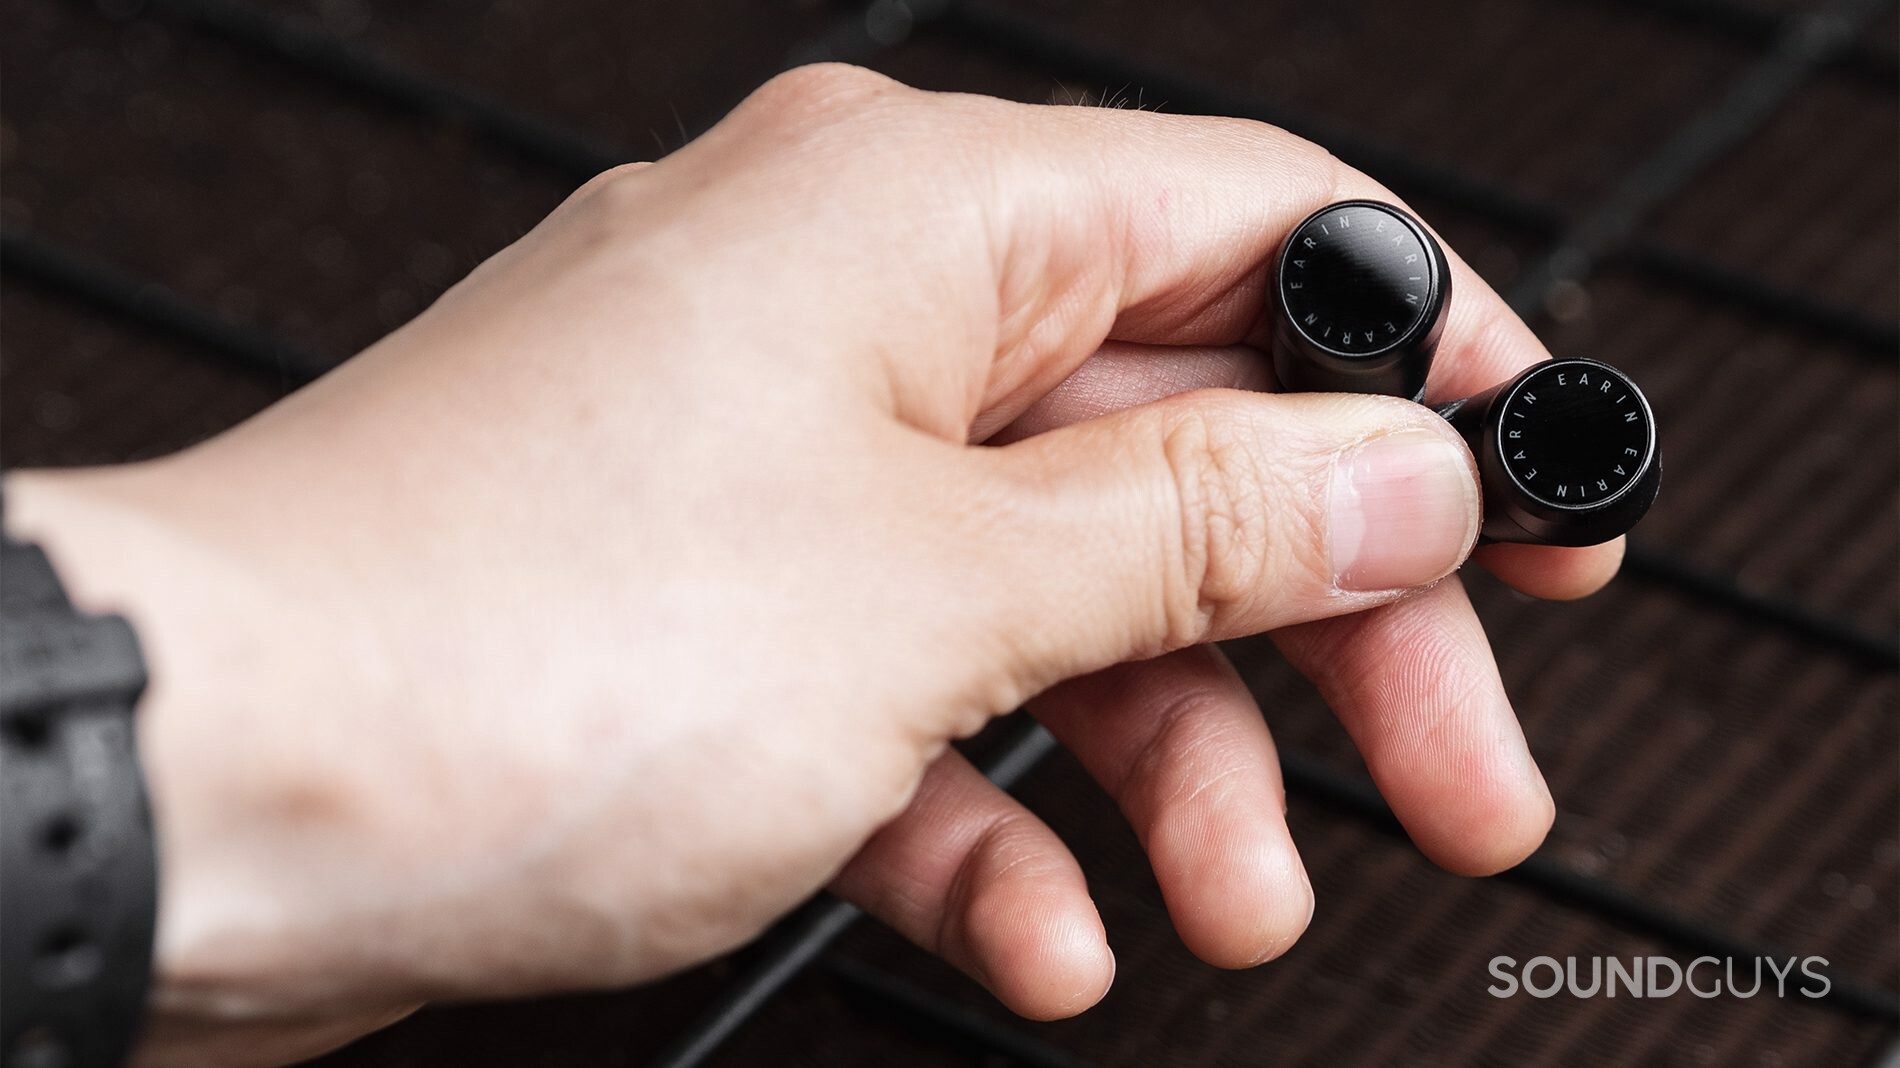 The Earin M-2 earbuds are in the hand, showing off the touch control panels.